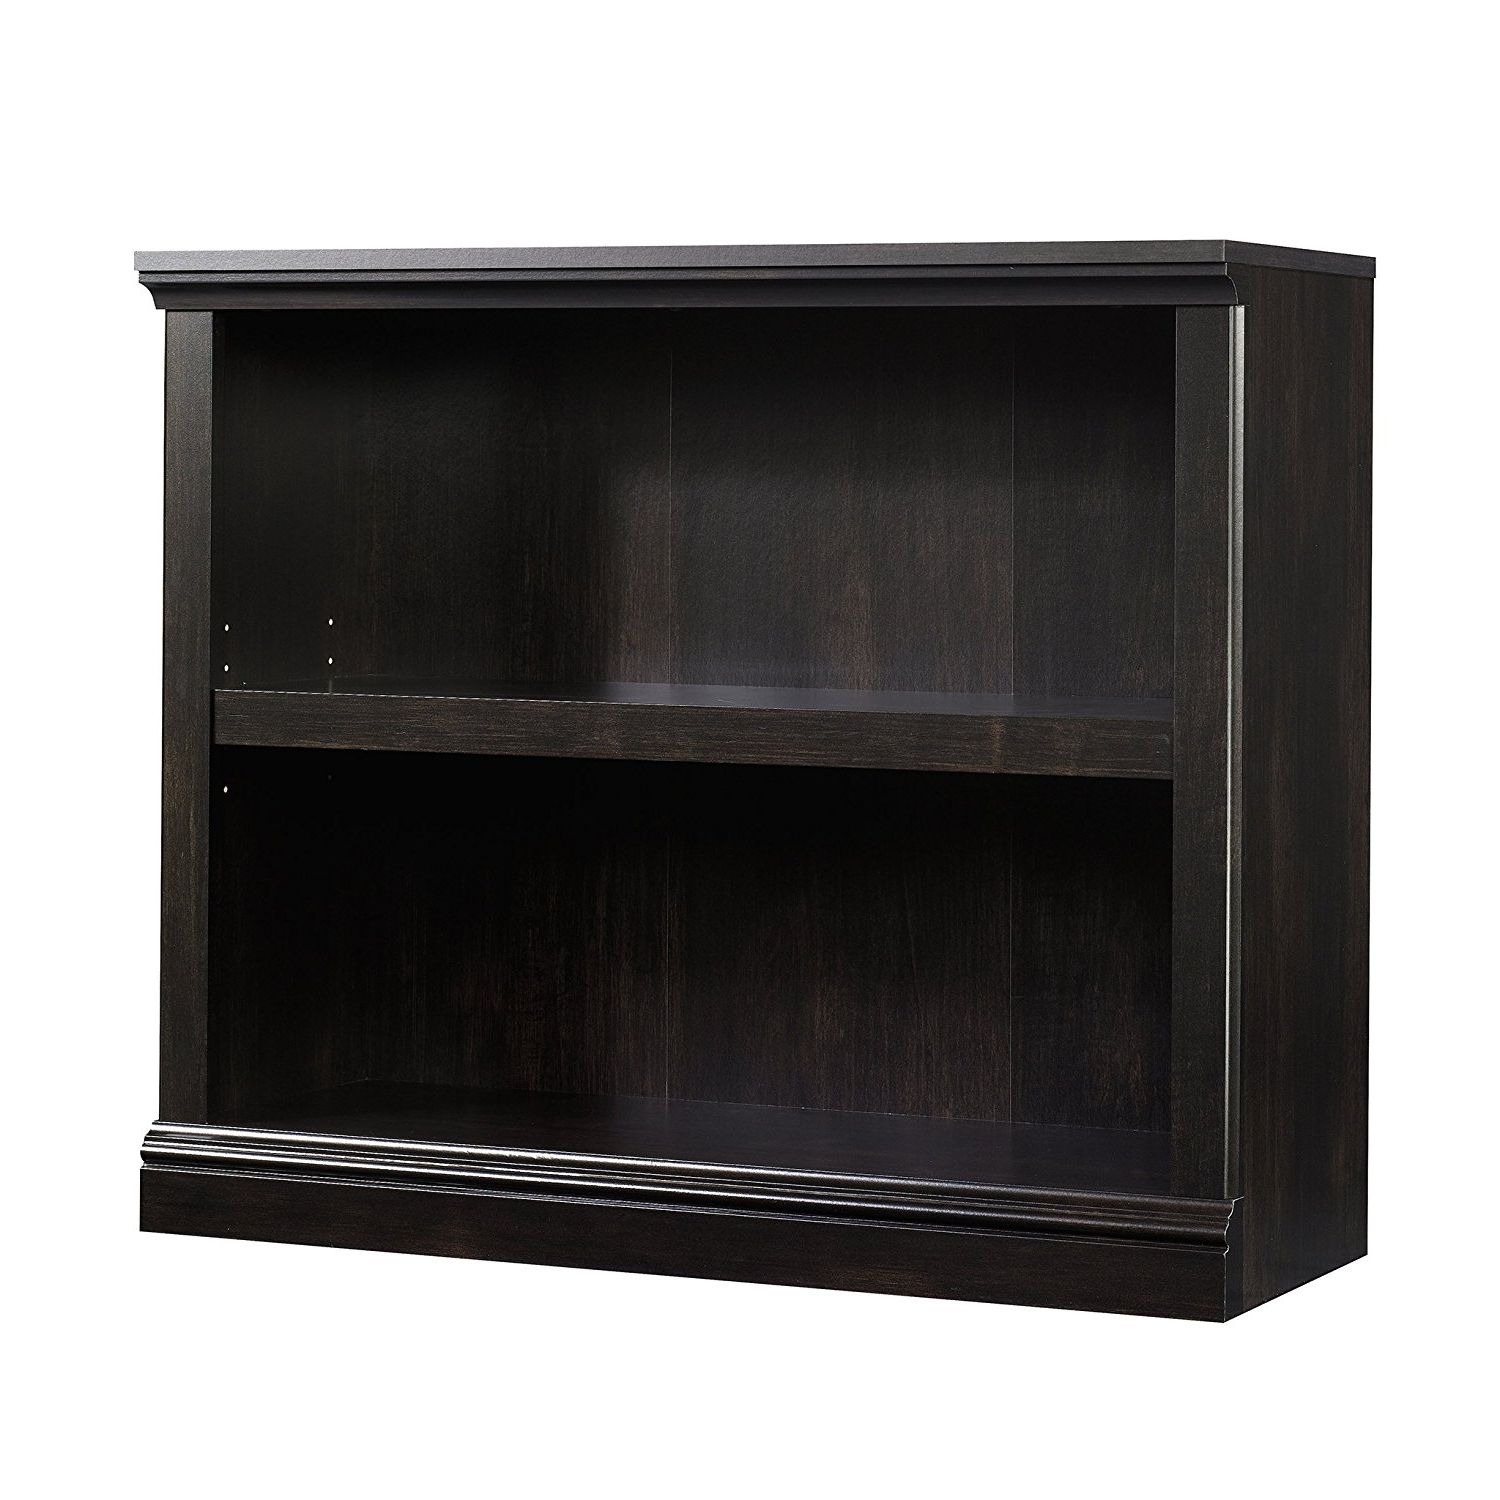 Most Recently Released Two Shelf Bookcases With Regard To Amazon: Sauder 414237 Sauder Select 2 Shelf Bookcase, Estate (View 11 of 15)